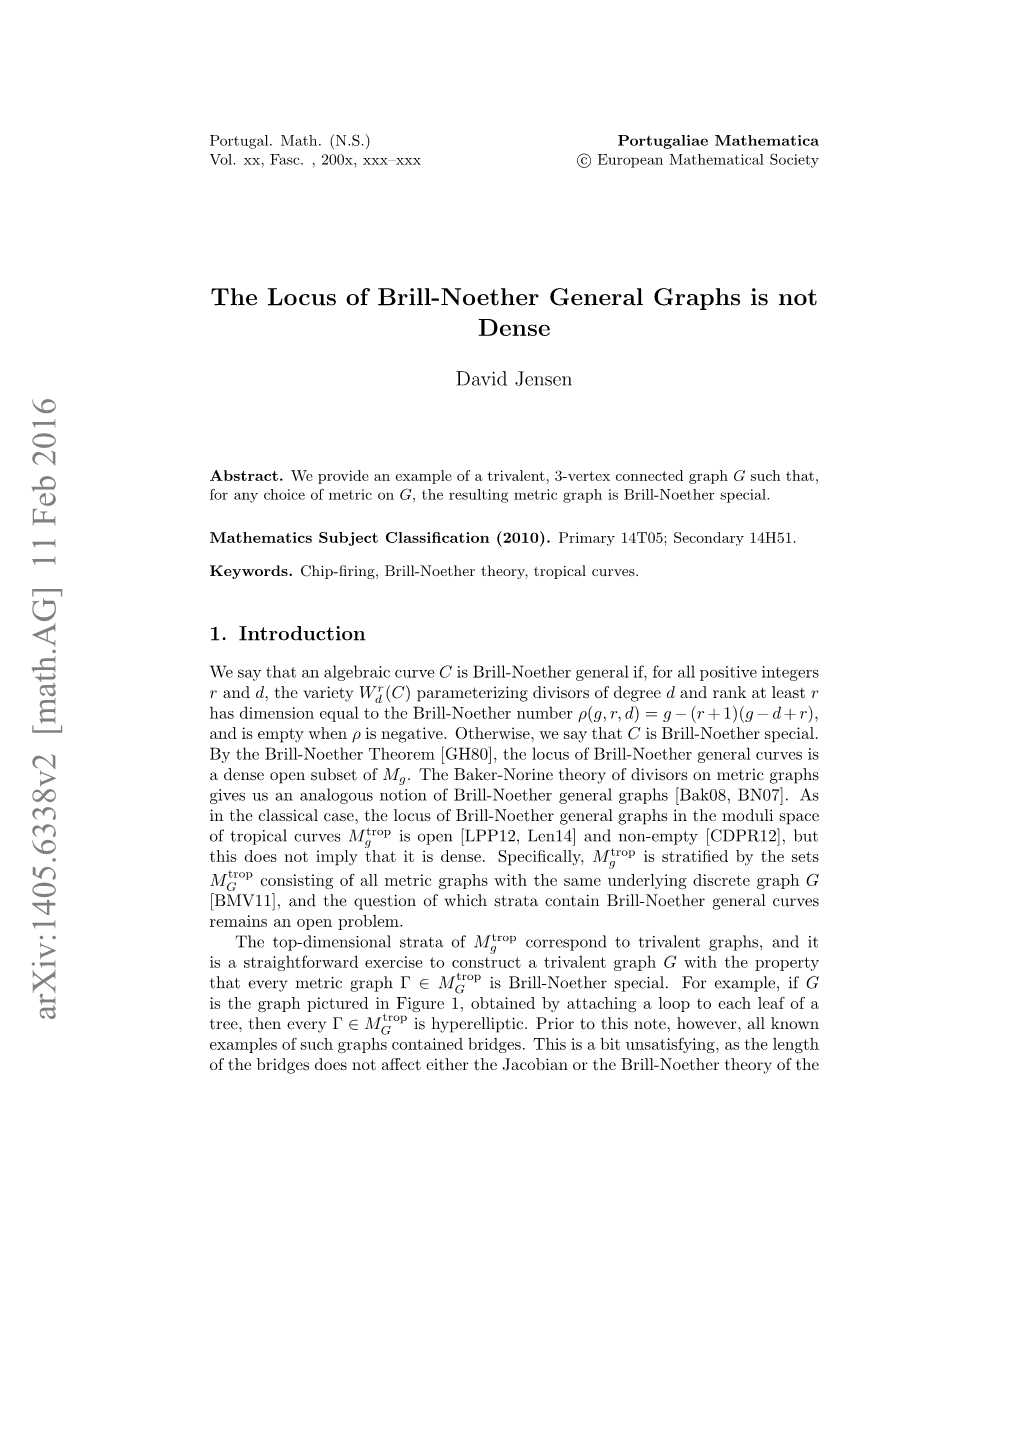 The Locus of Brill-Noether General Graphs Is Not Dense 3 Possesses a Divisor of Degree 7 and Rank 2